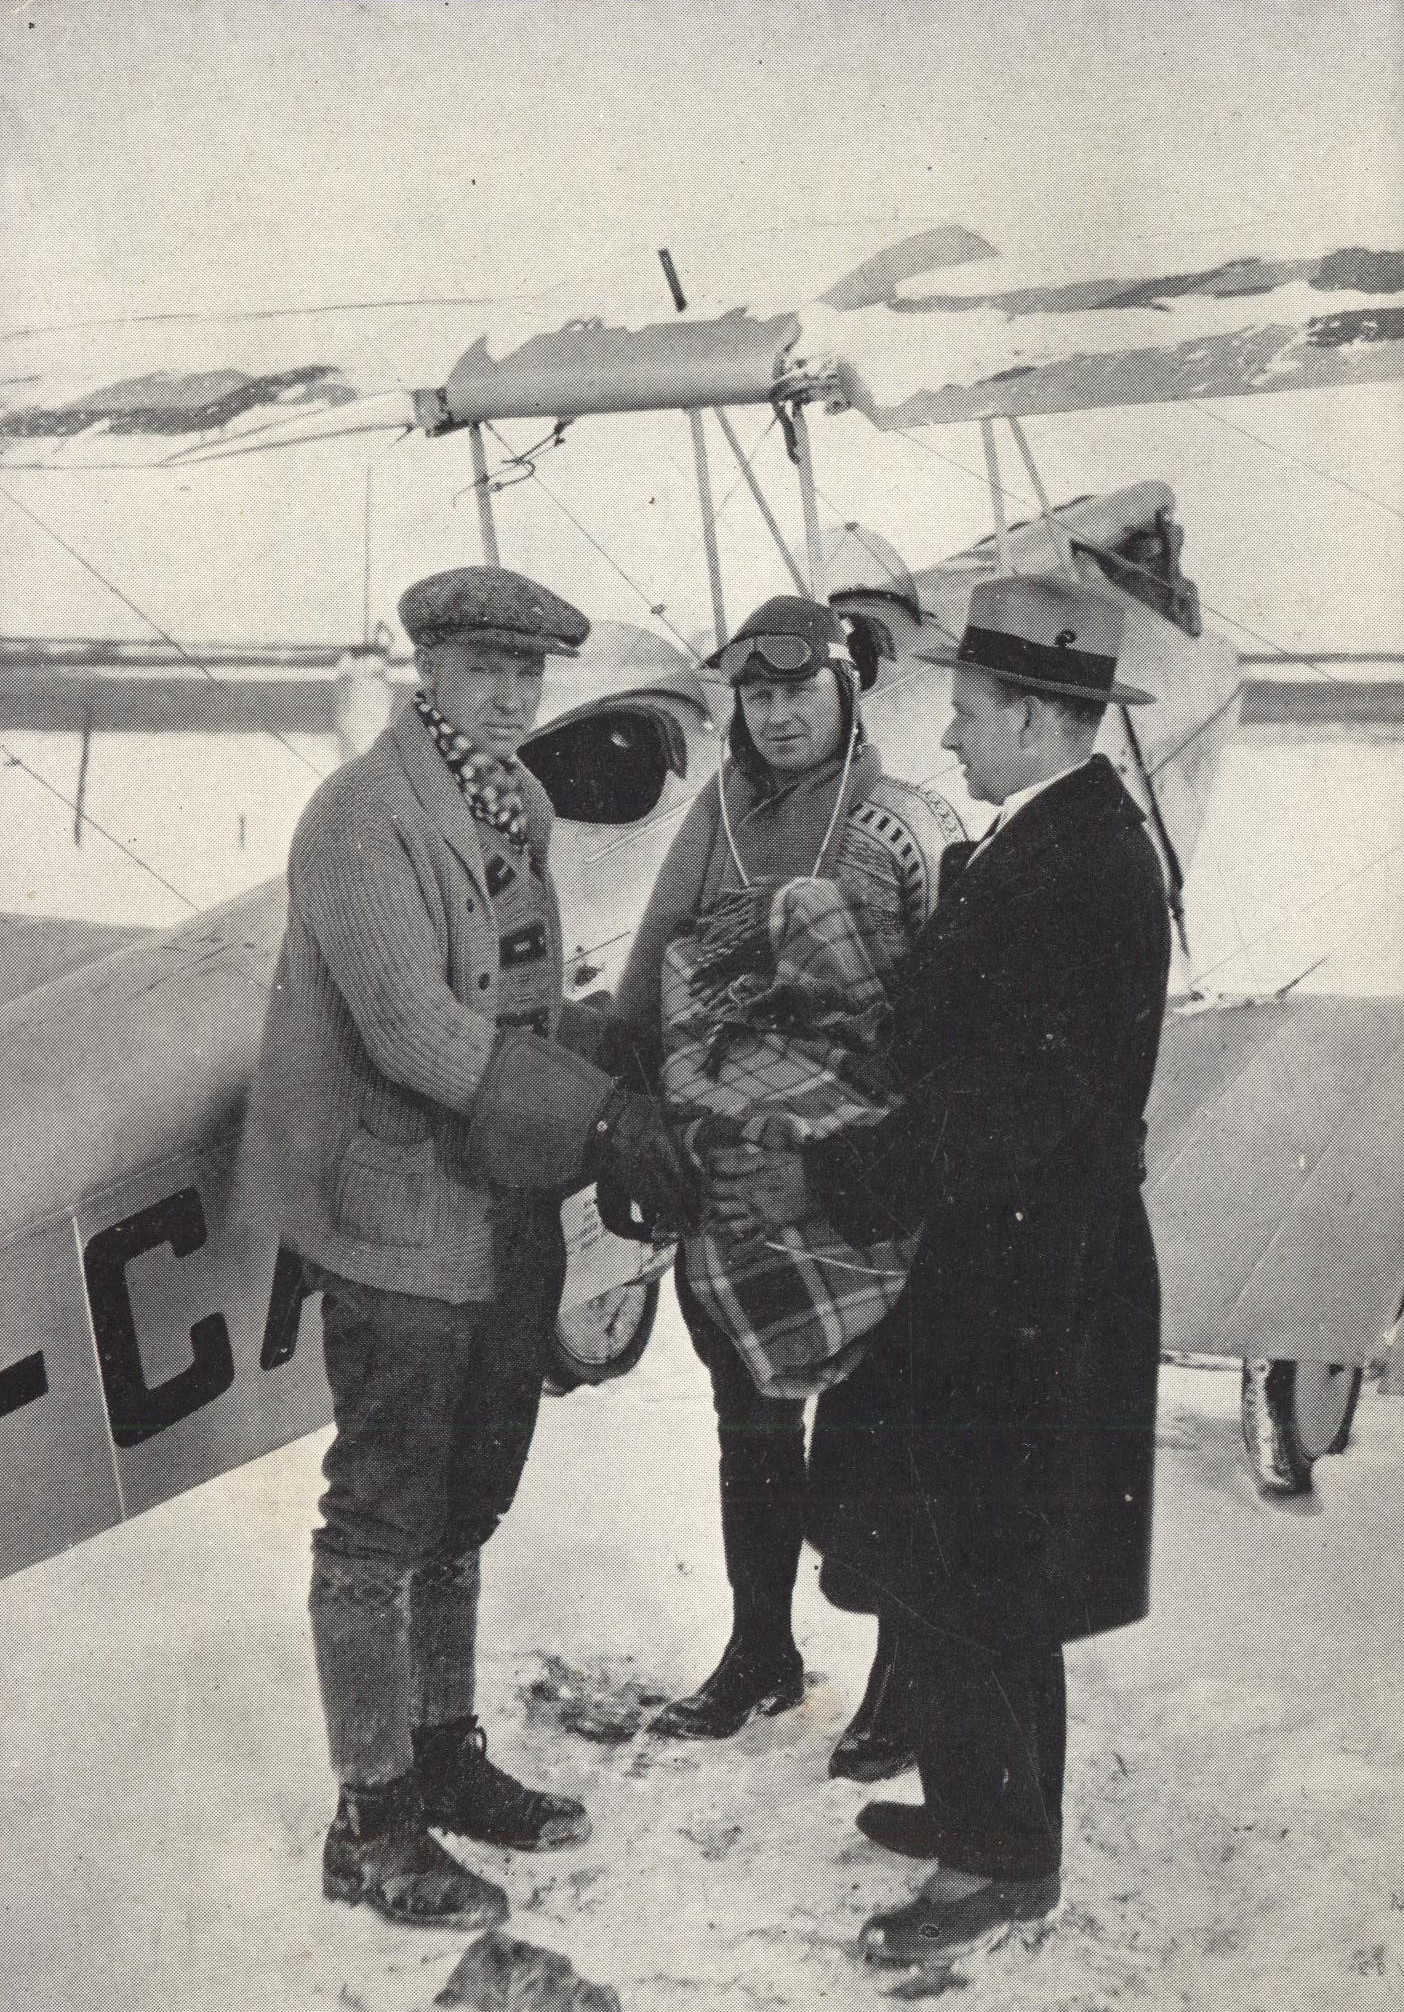 Three men standing in front of a open cockpit biplane in the winter